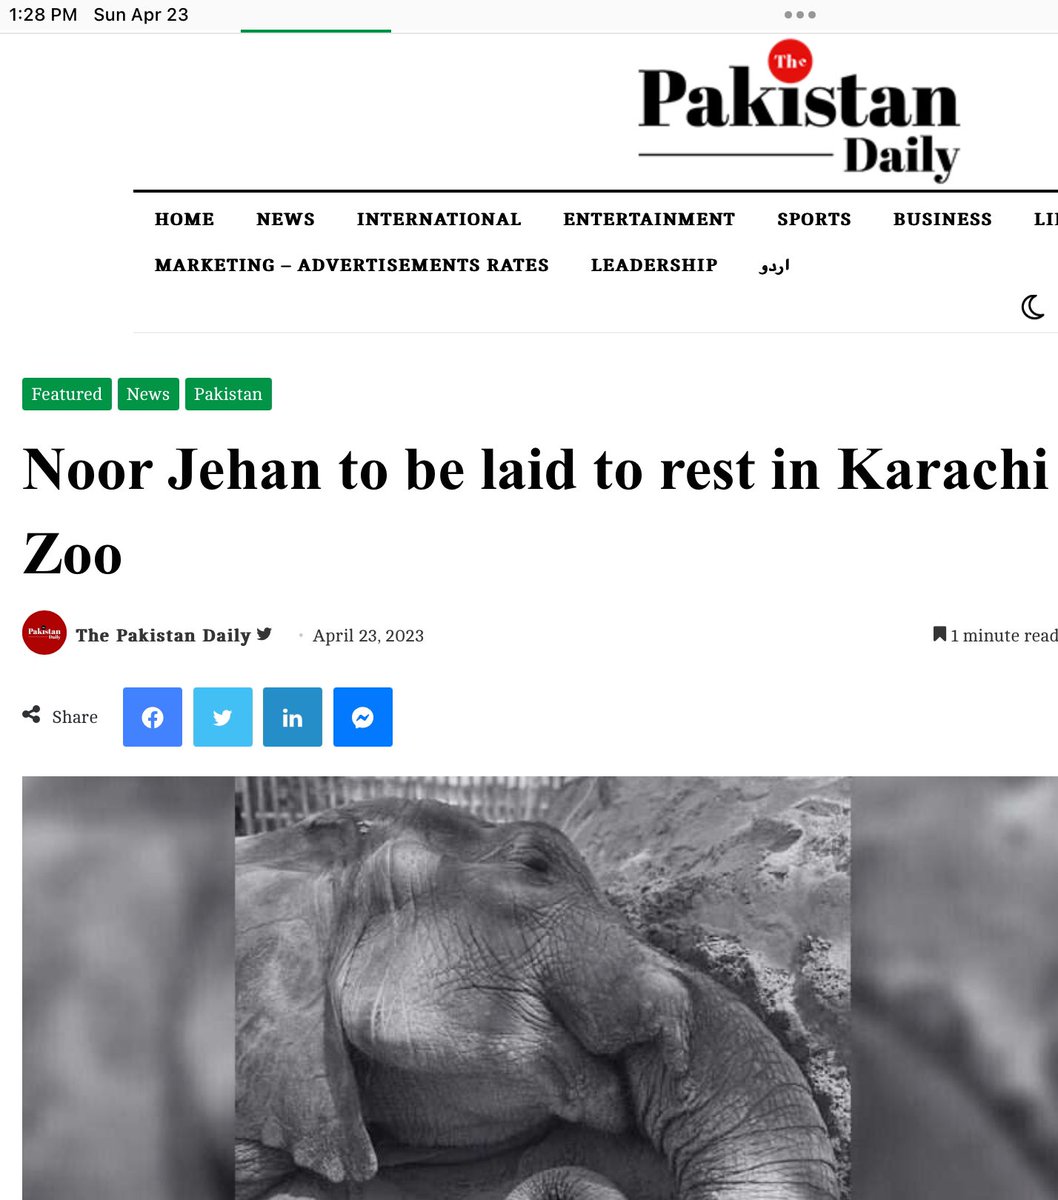 “Karachi Administrator Saifur Rehman on Sunday announced that Noor Jehan, a much-loved African elephant, will be laid to rest within the zoo’s grounds.”

#NoMoreSuffering #Sanctuary4Karachi3 #CloseKarachiZoo #RIPNoorJehan #CaptivityKills